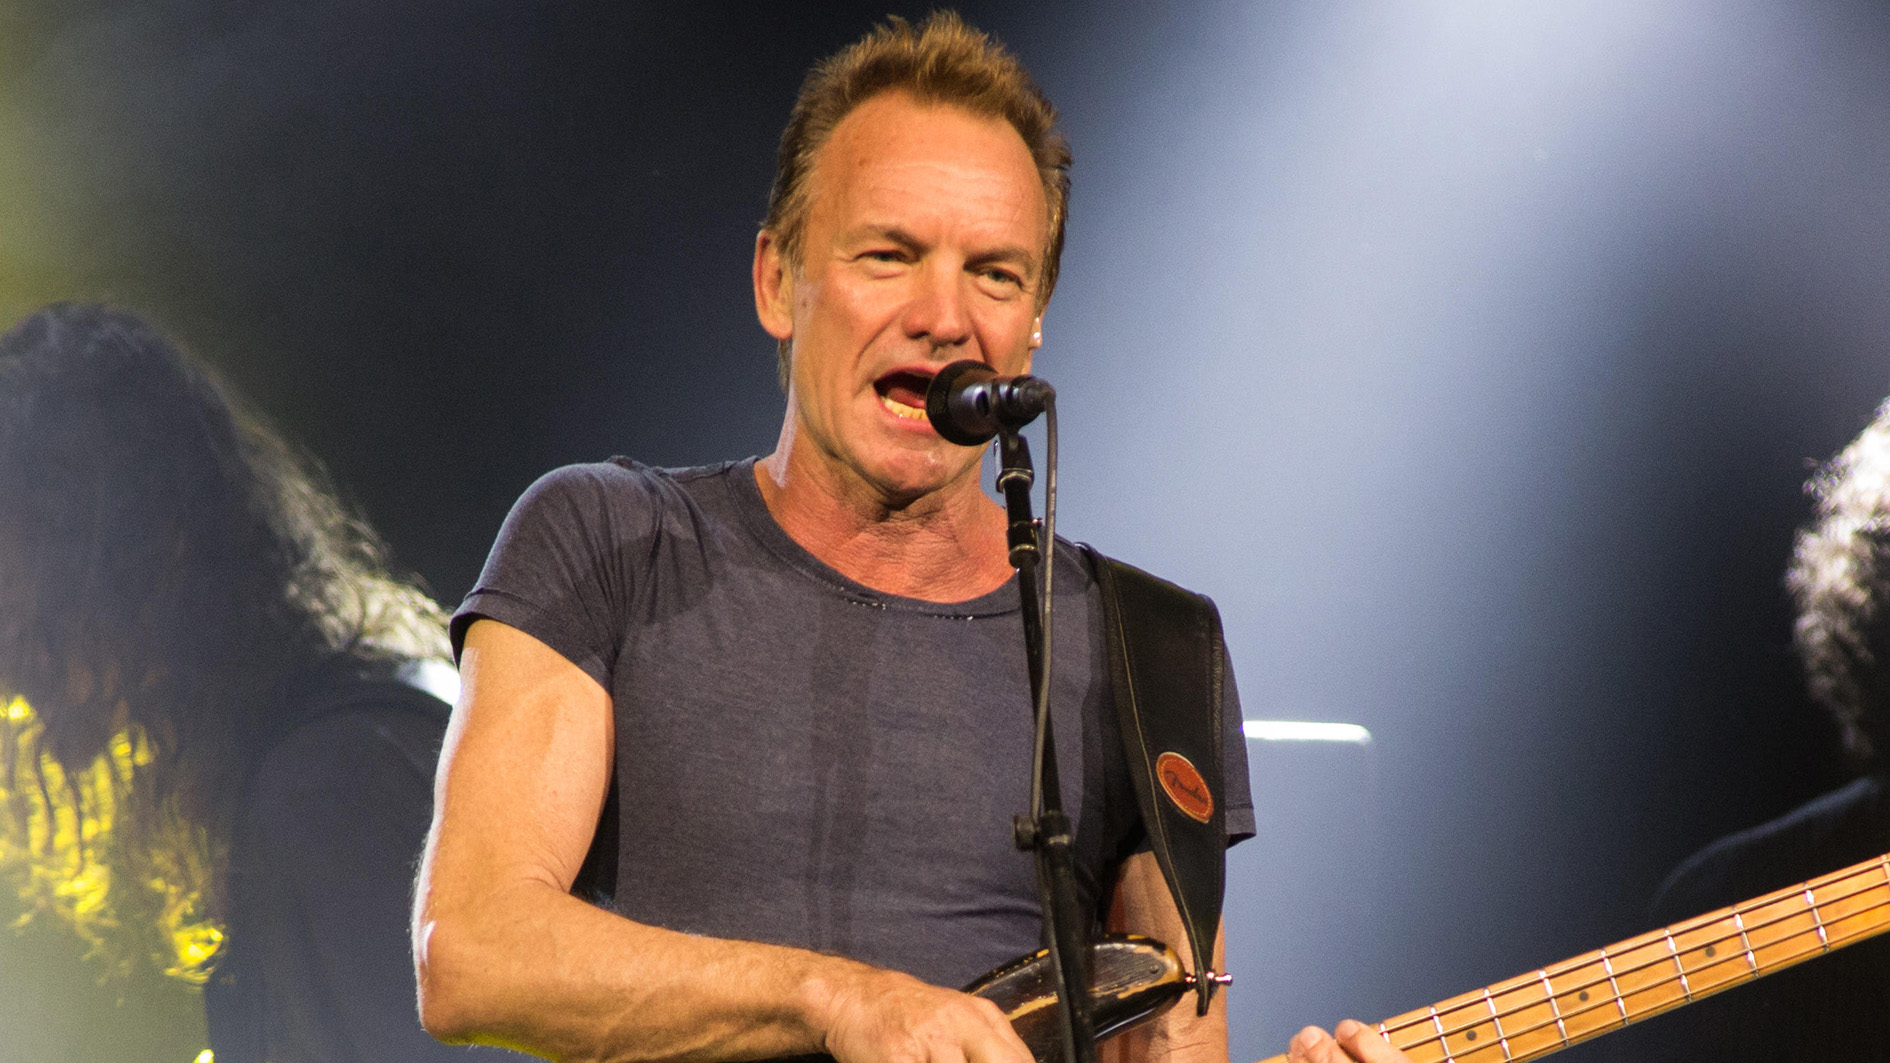 Sting: From The Police to solo singer success with 'Message In A